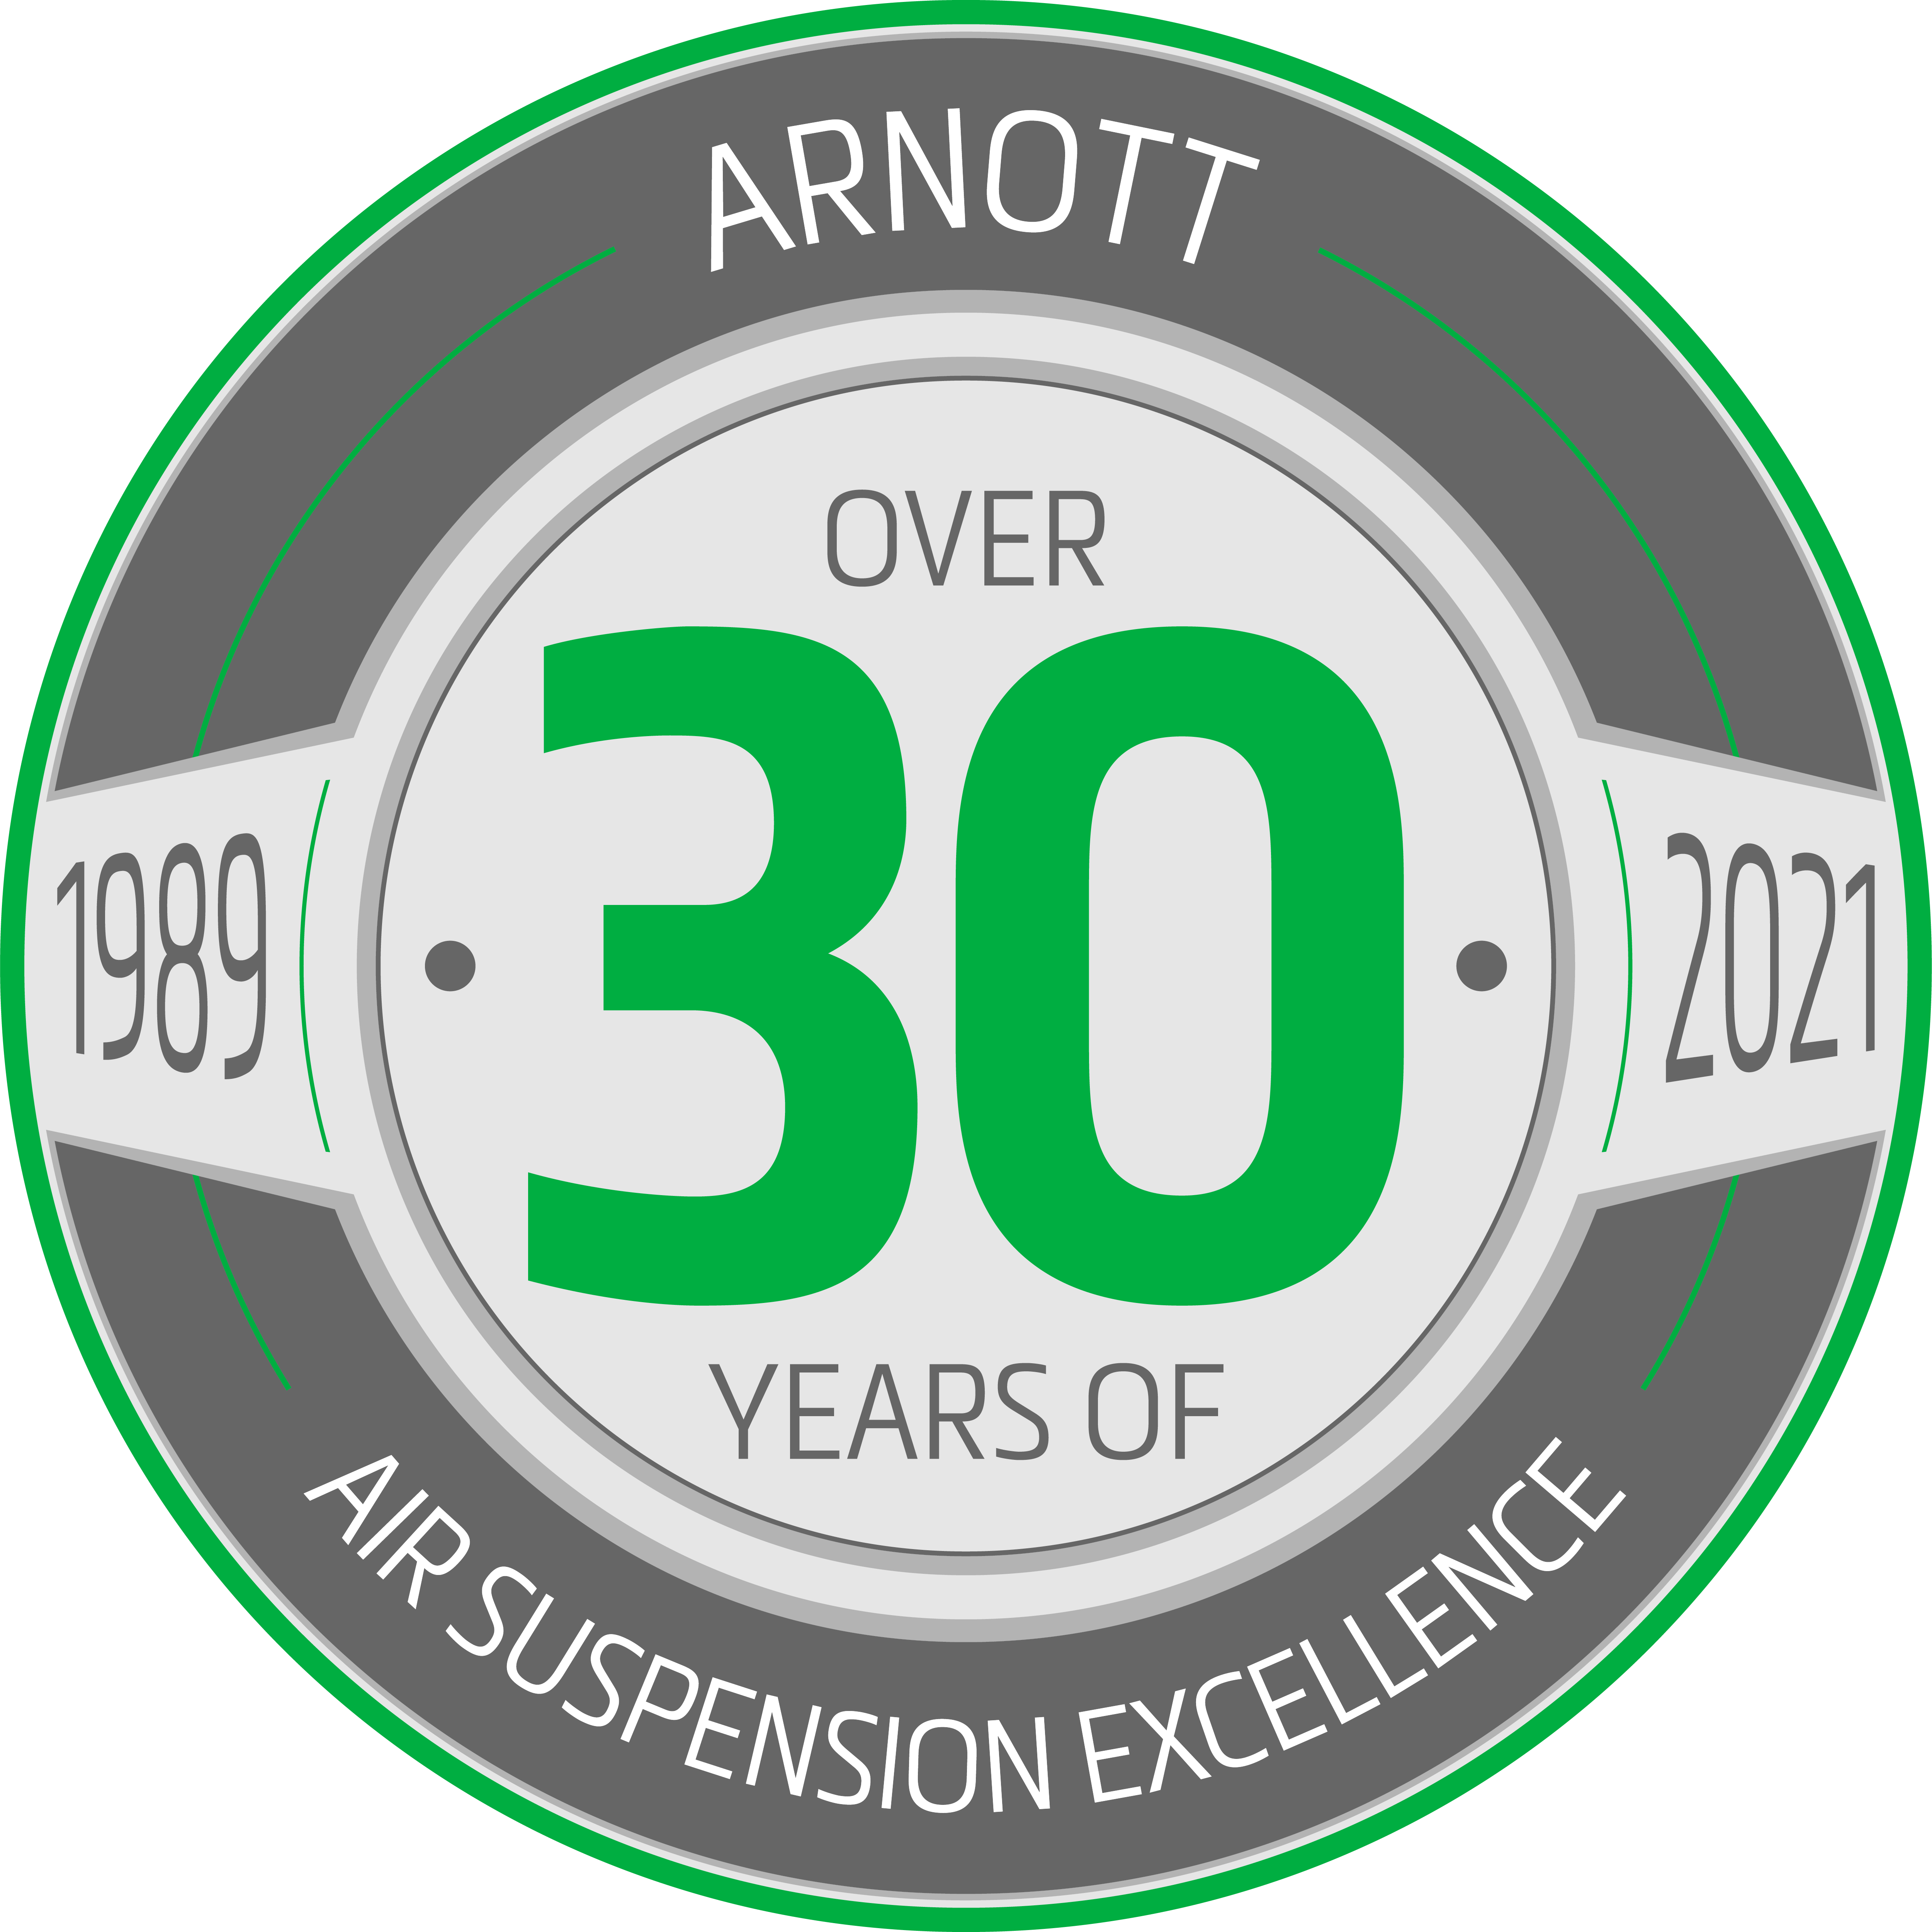 Arnott: Over 30 Years of Air Suspension Excellence